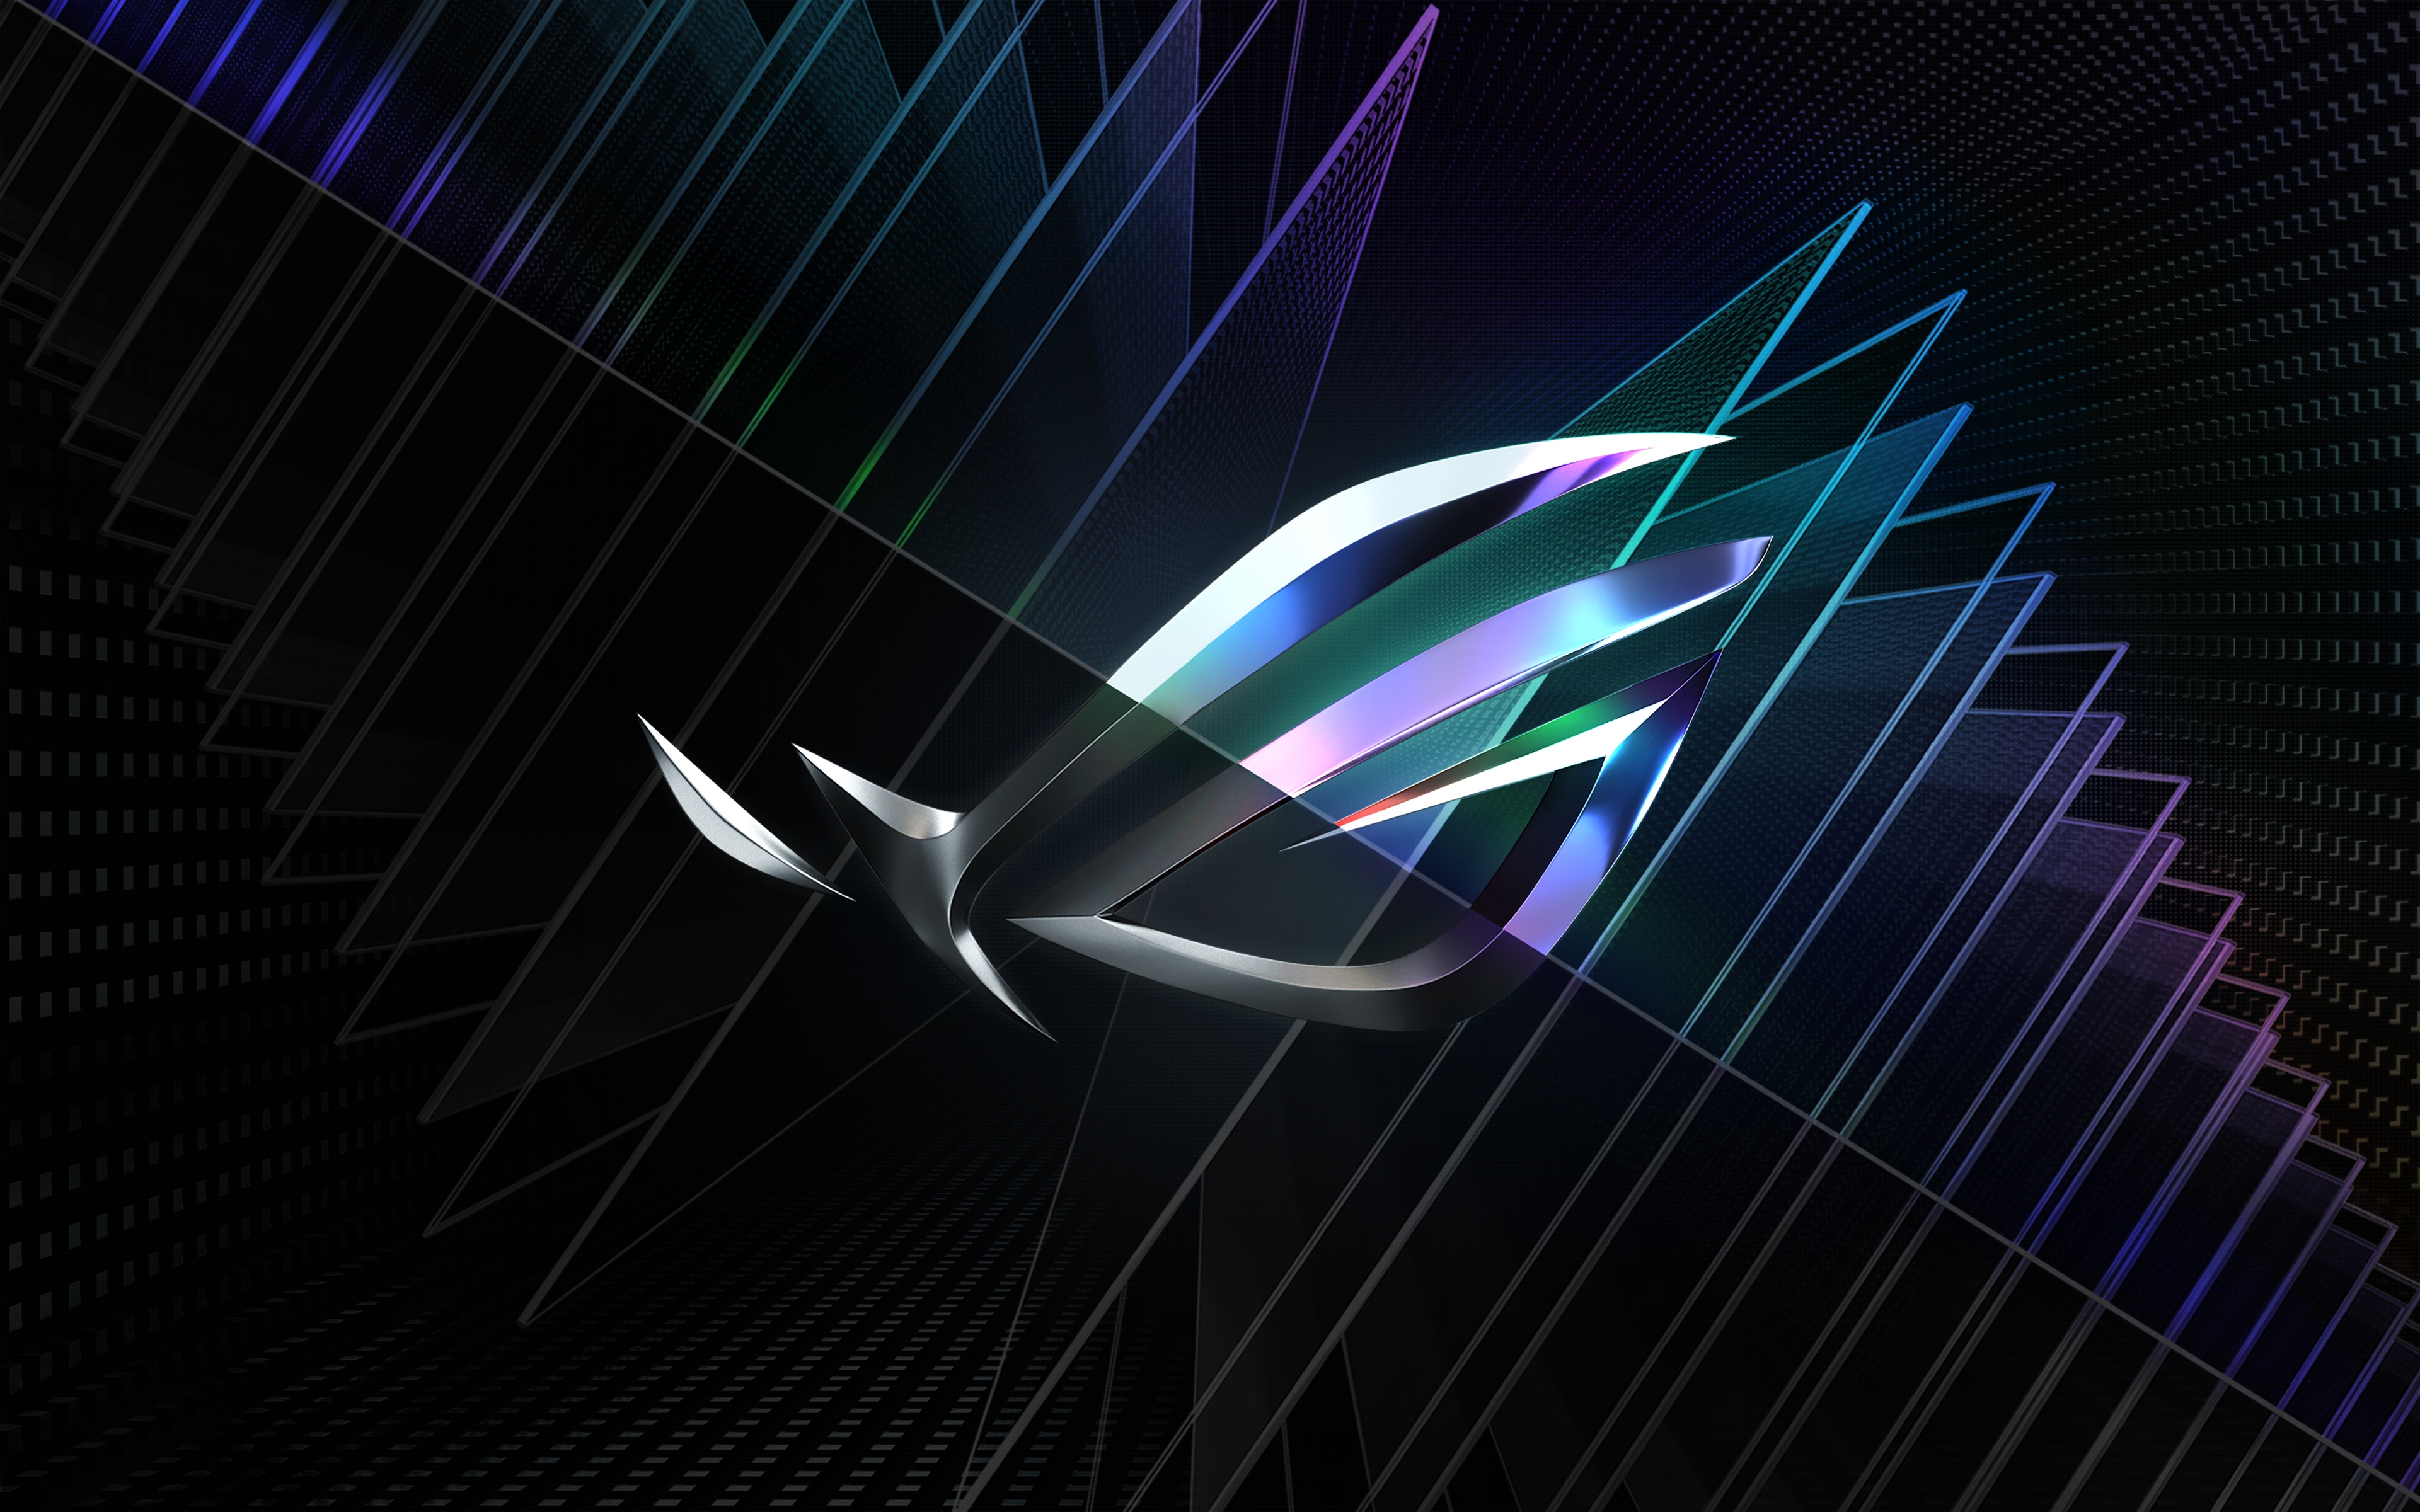 HD wallpaper, Asus Rog, Abstract Background, Dark Background